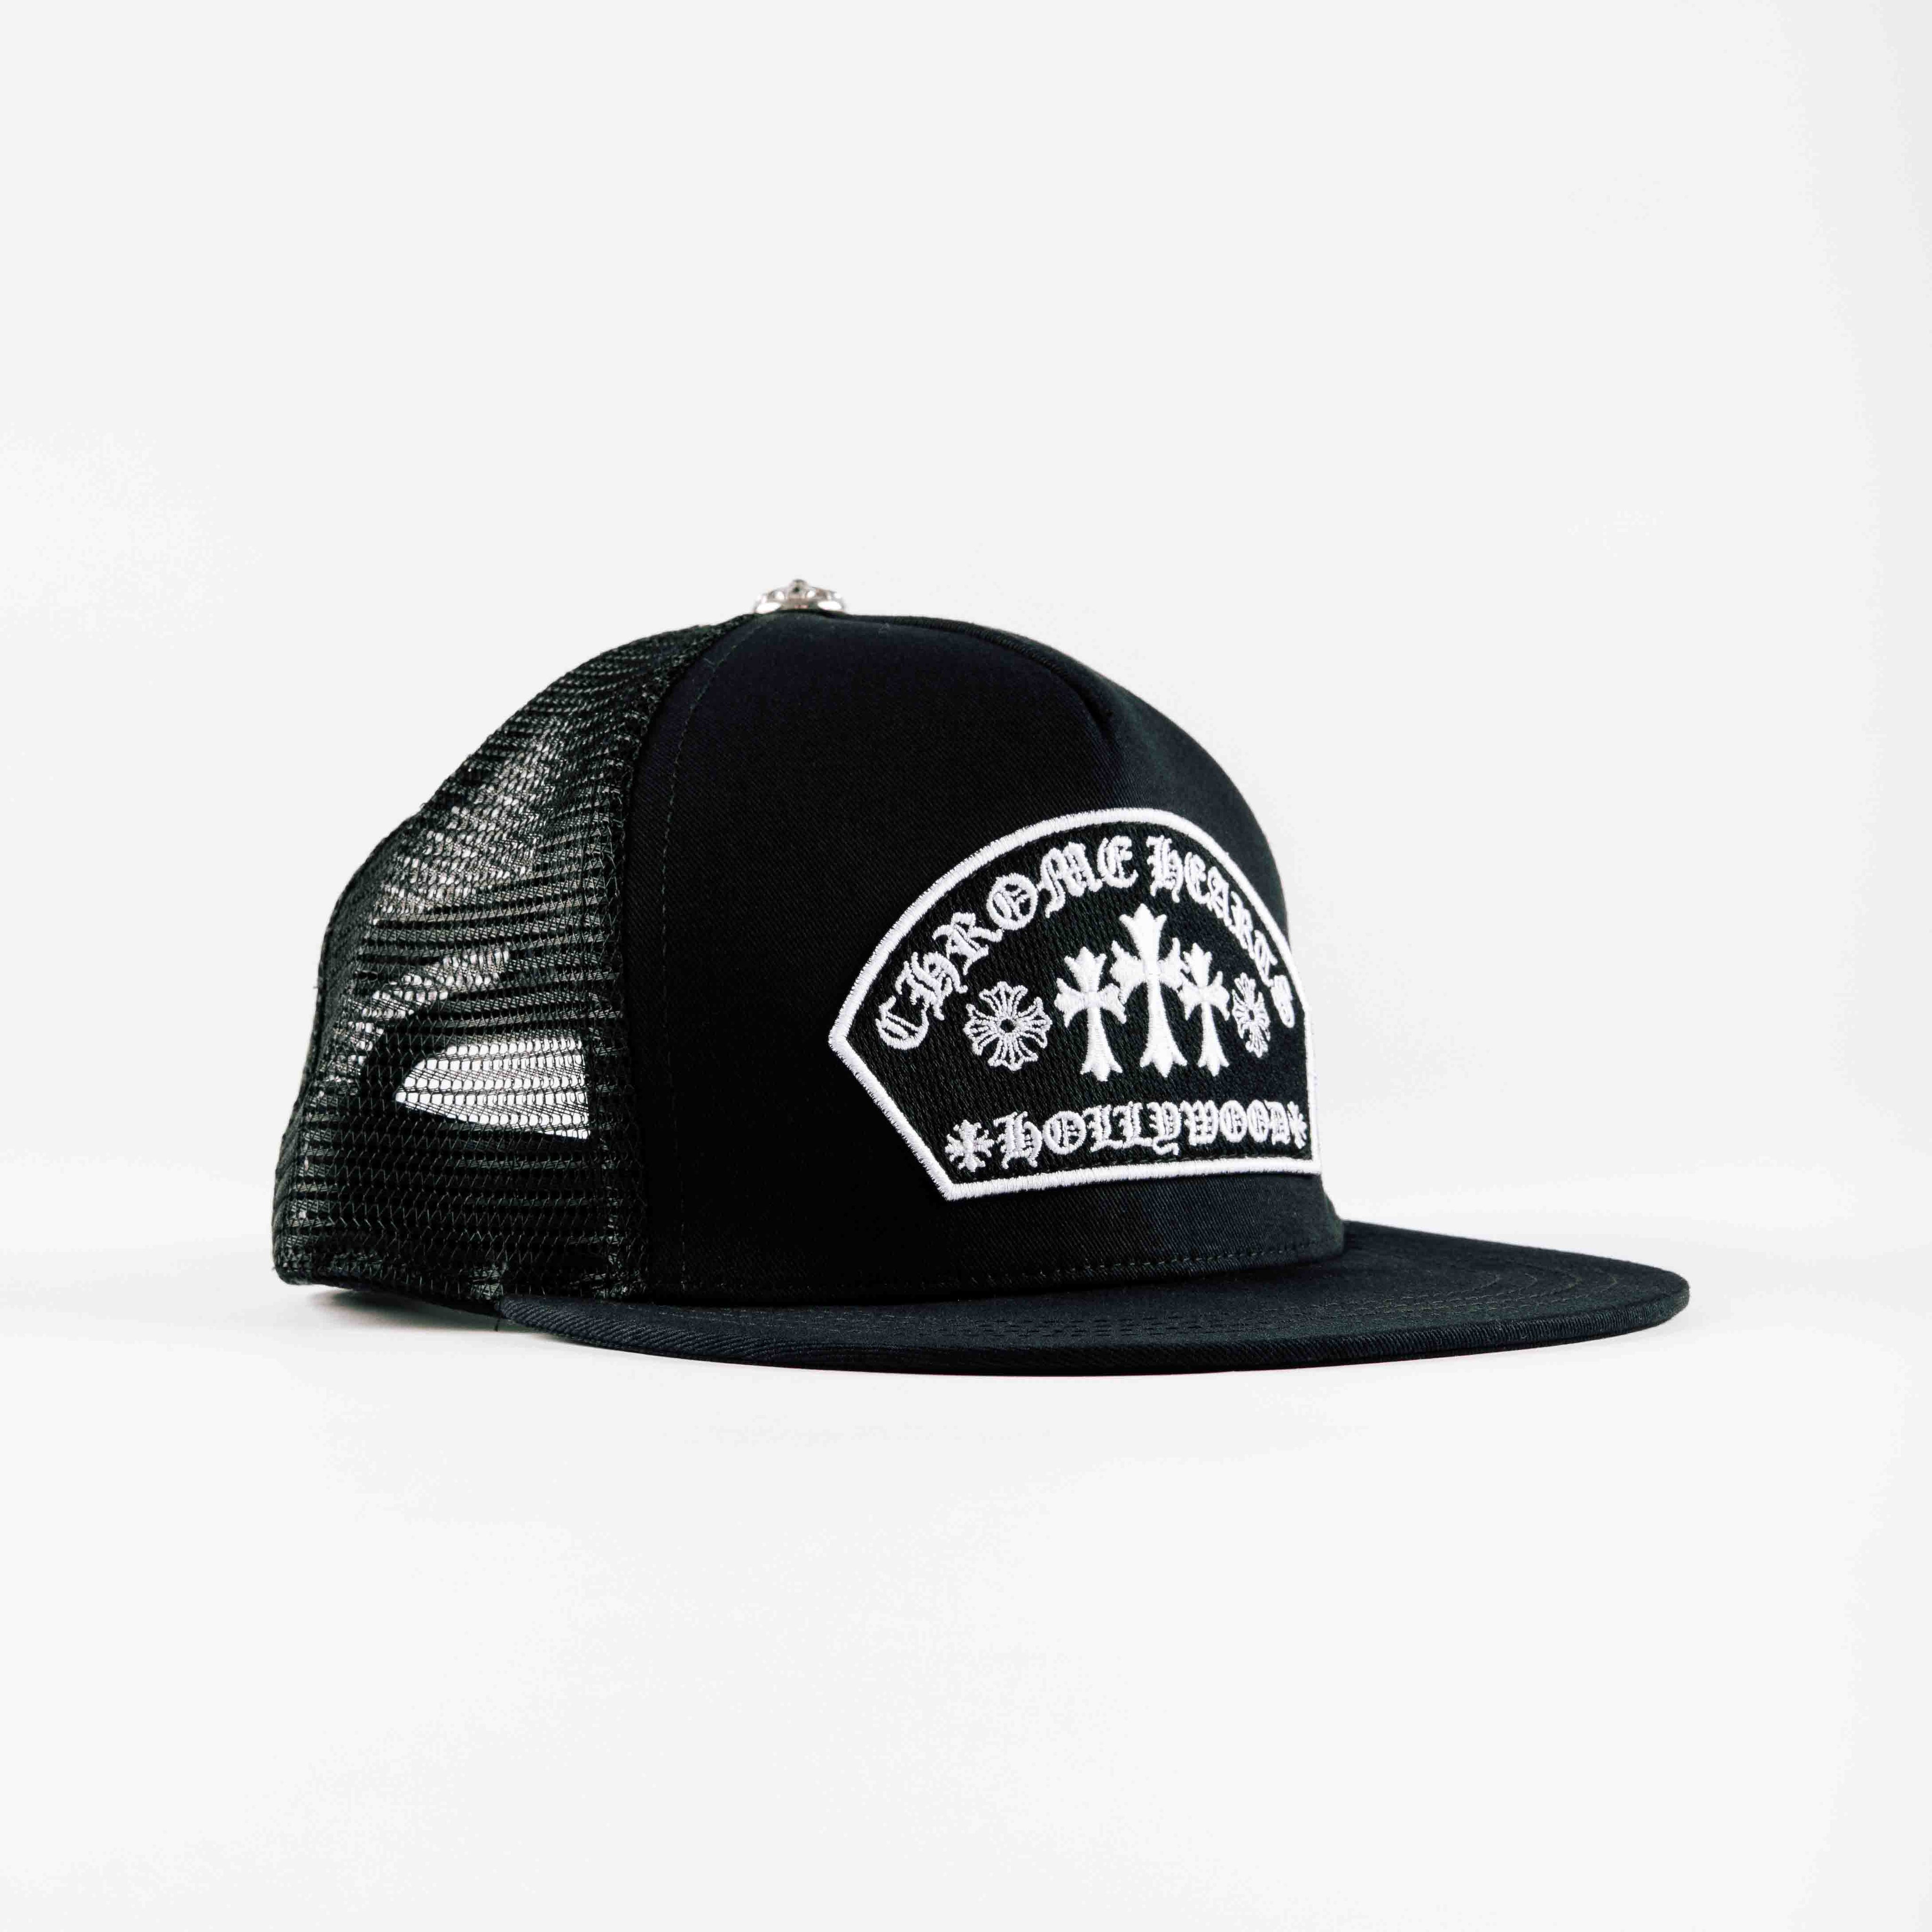 Chrome Hearts Arch Hollywood Trucker Hat Black/White